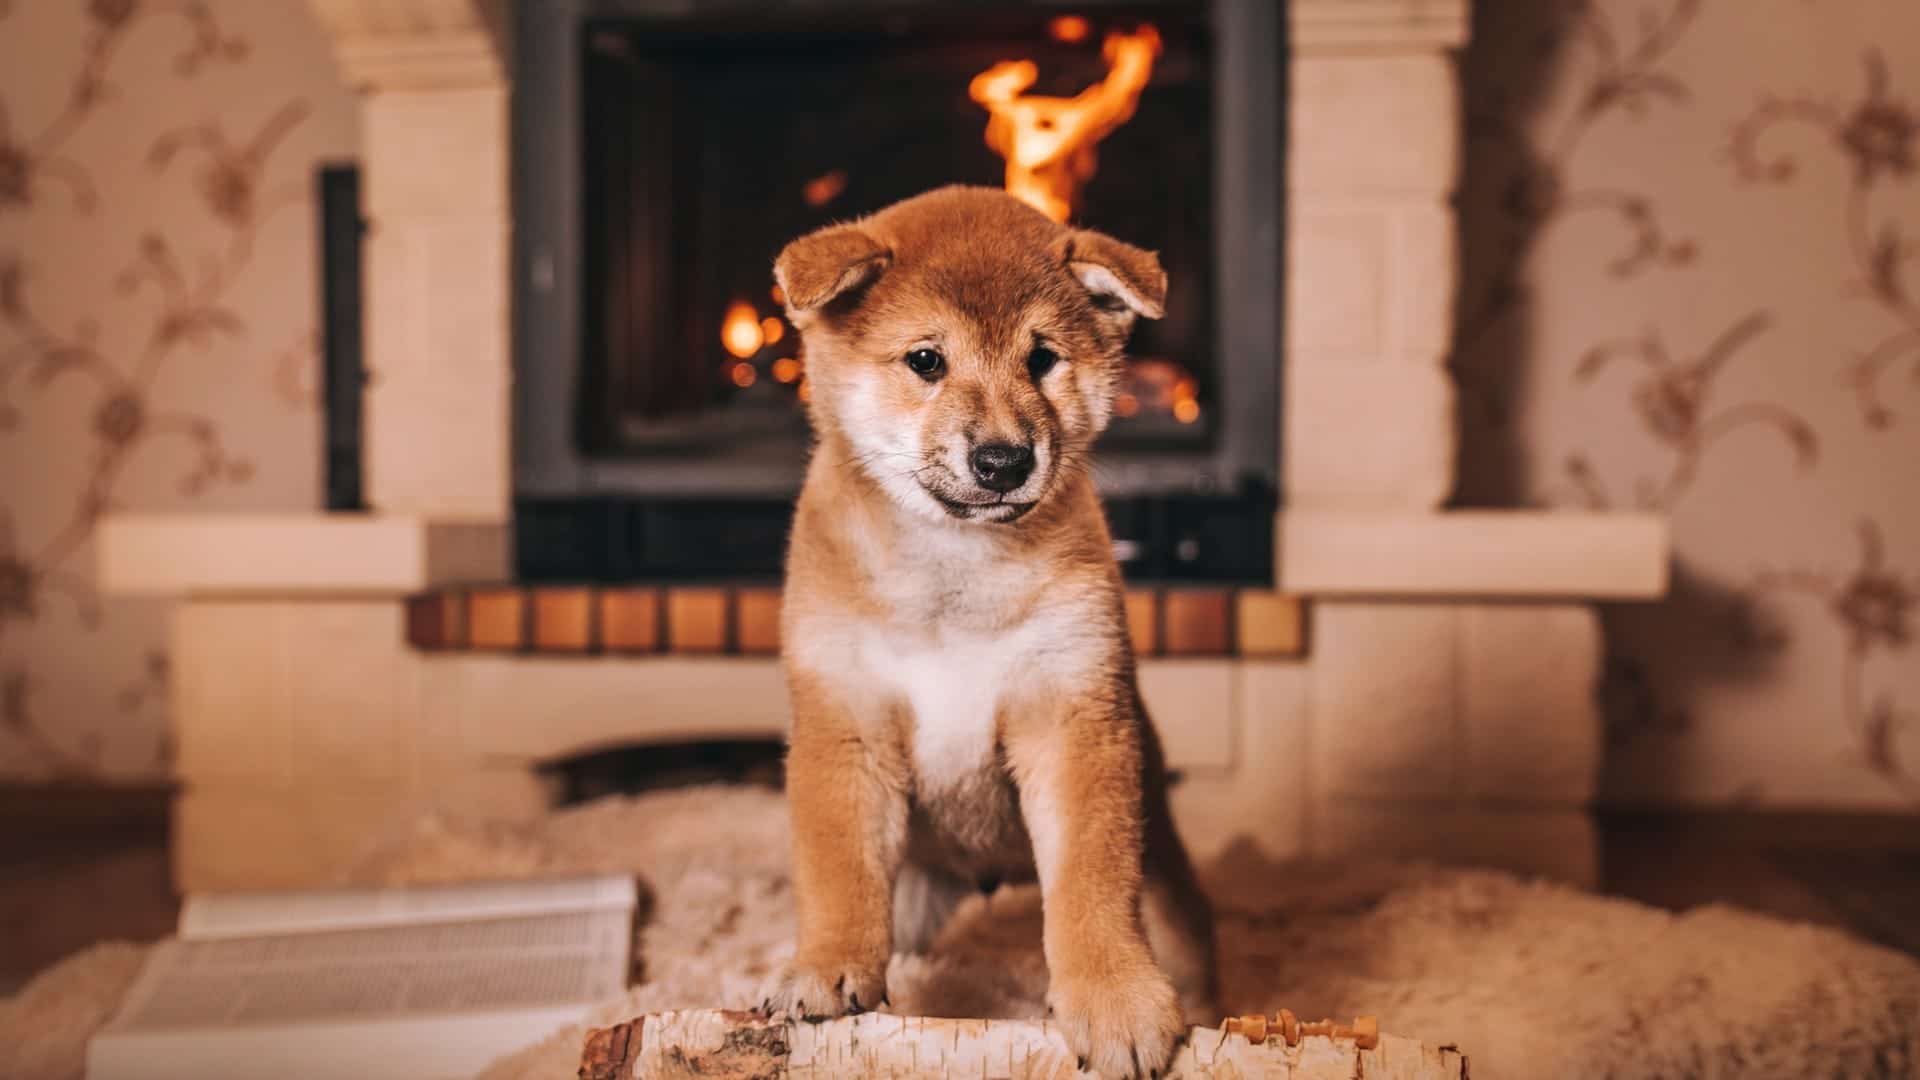 With Shiba Inu fall, developer asks fans to “burn” cryptocurrency